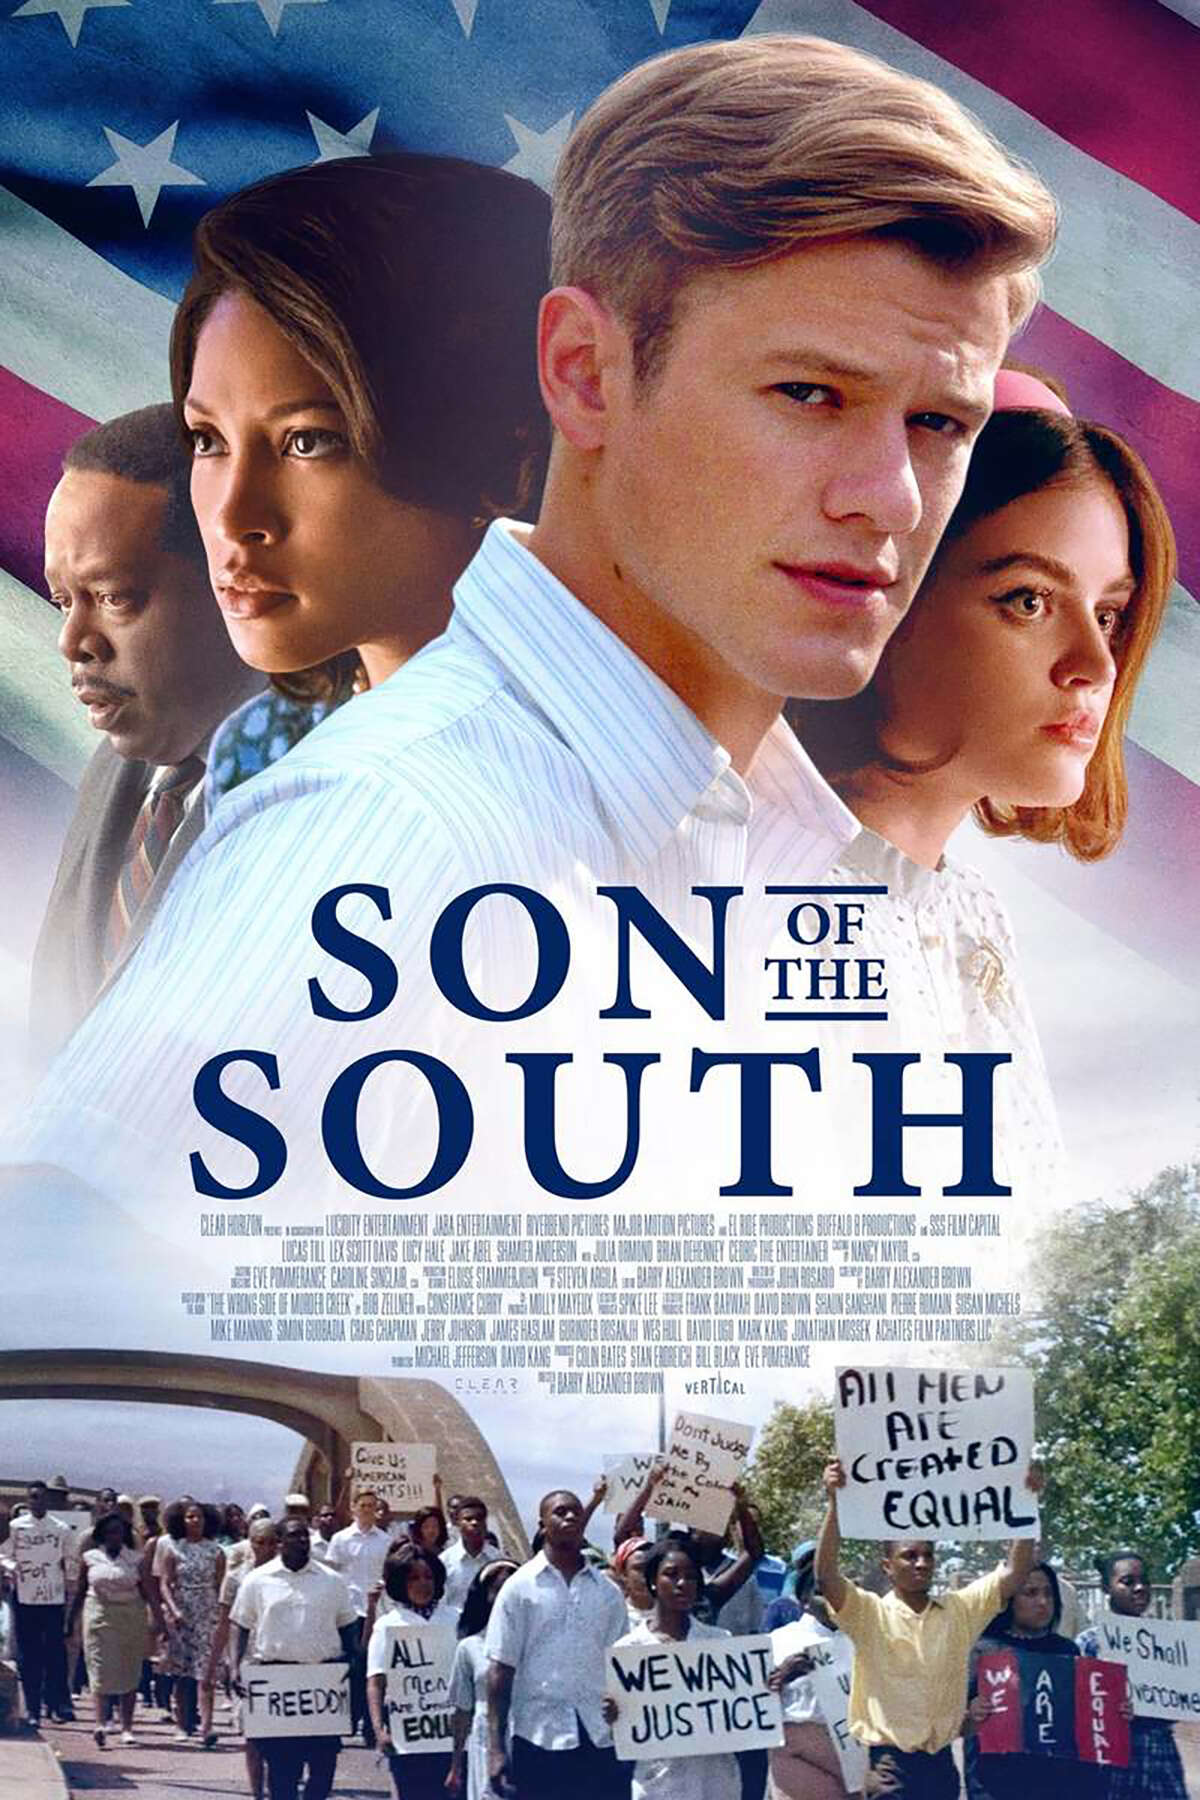 "Son of the South"